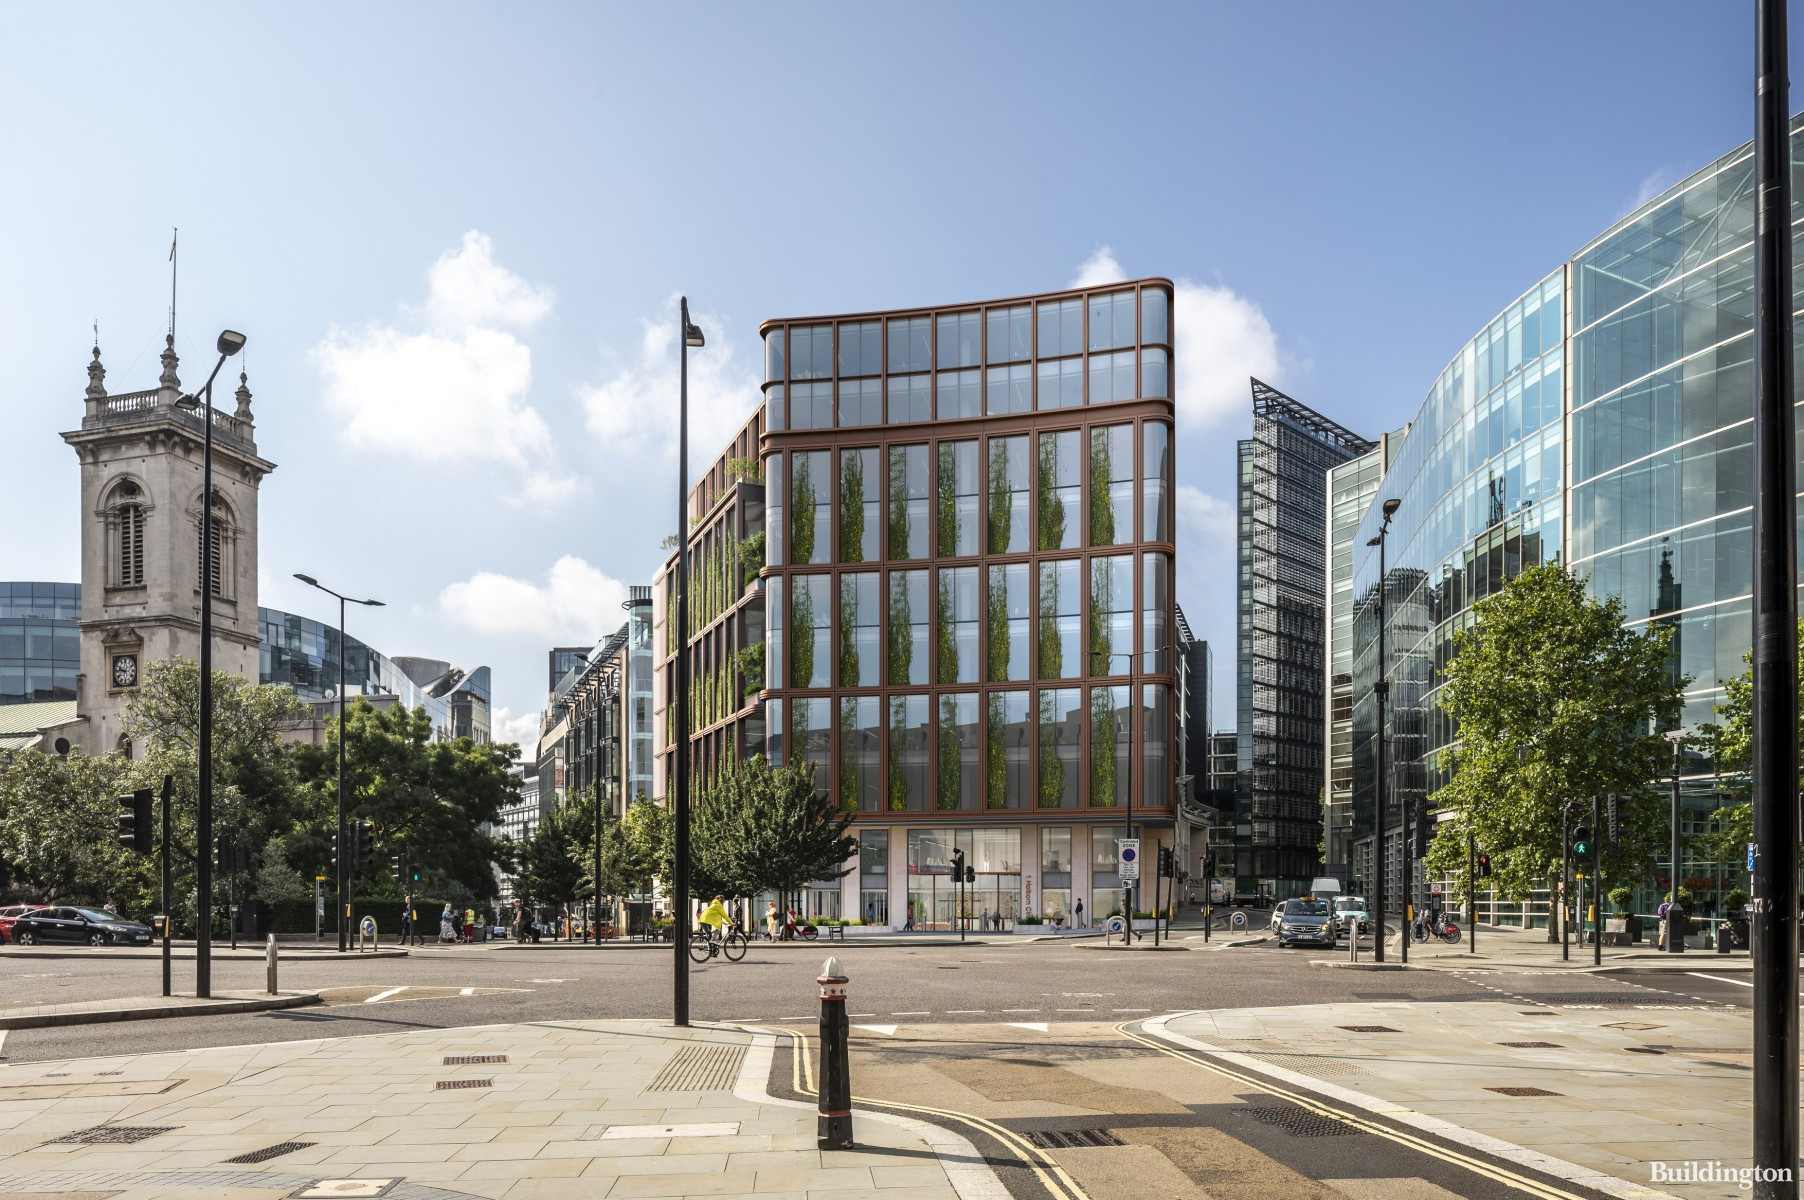 CGI of the new building on the Thavies Inn House site in Holborn Circus.